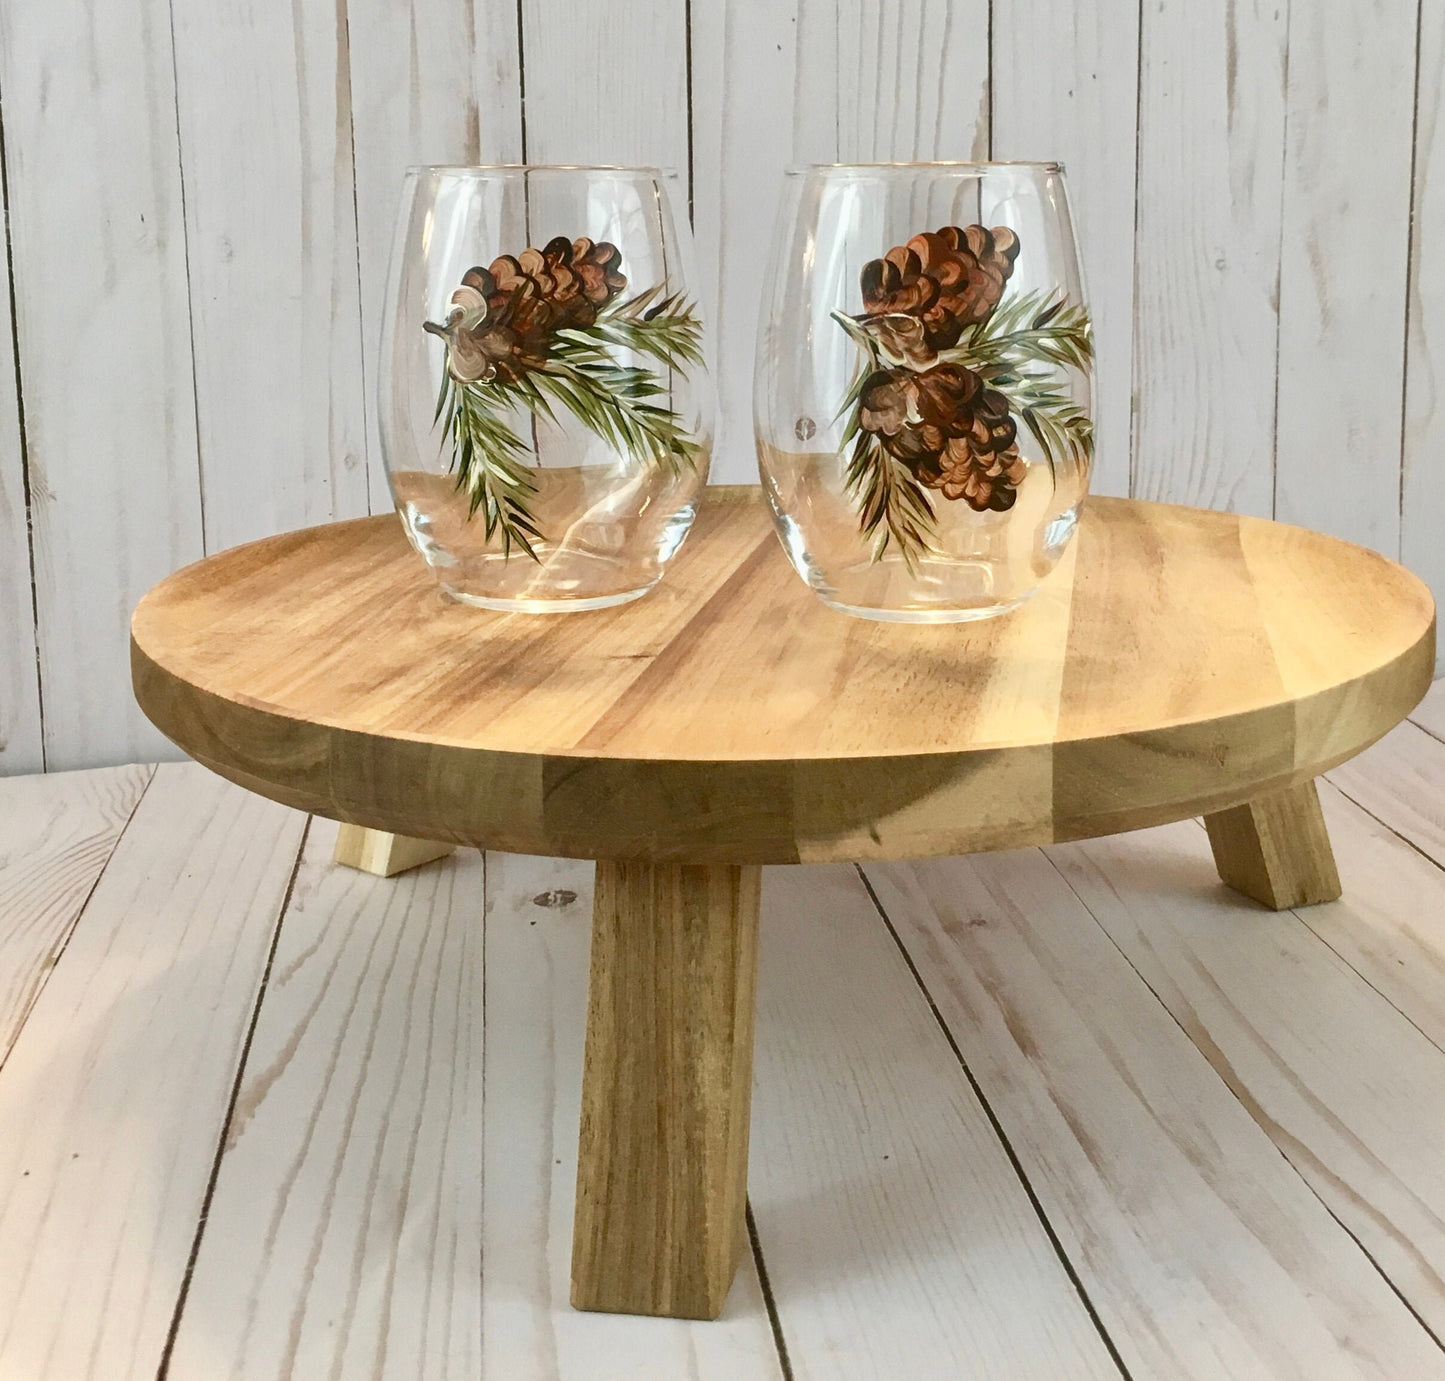 Pine Cone Hand Painted Unstemmed Wine Glasses for Fall Holidays